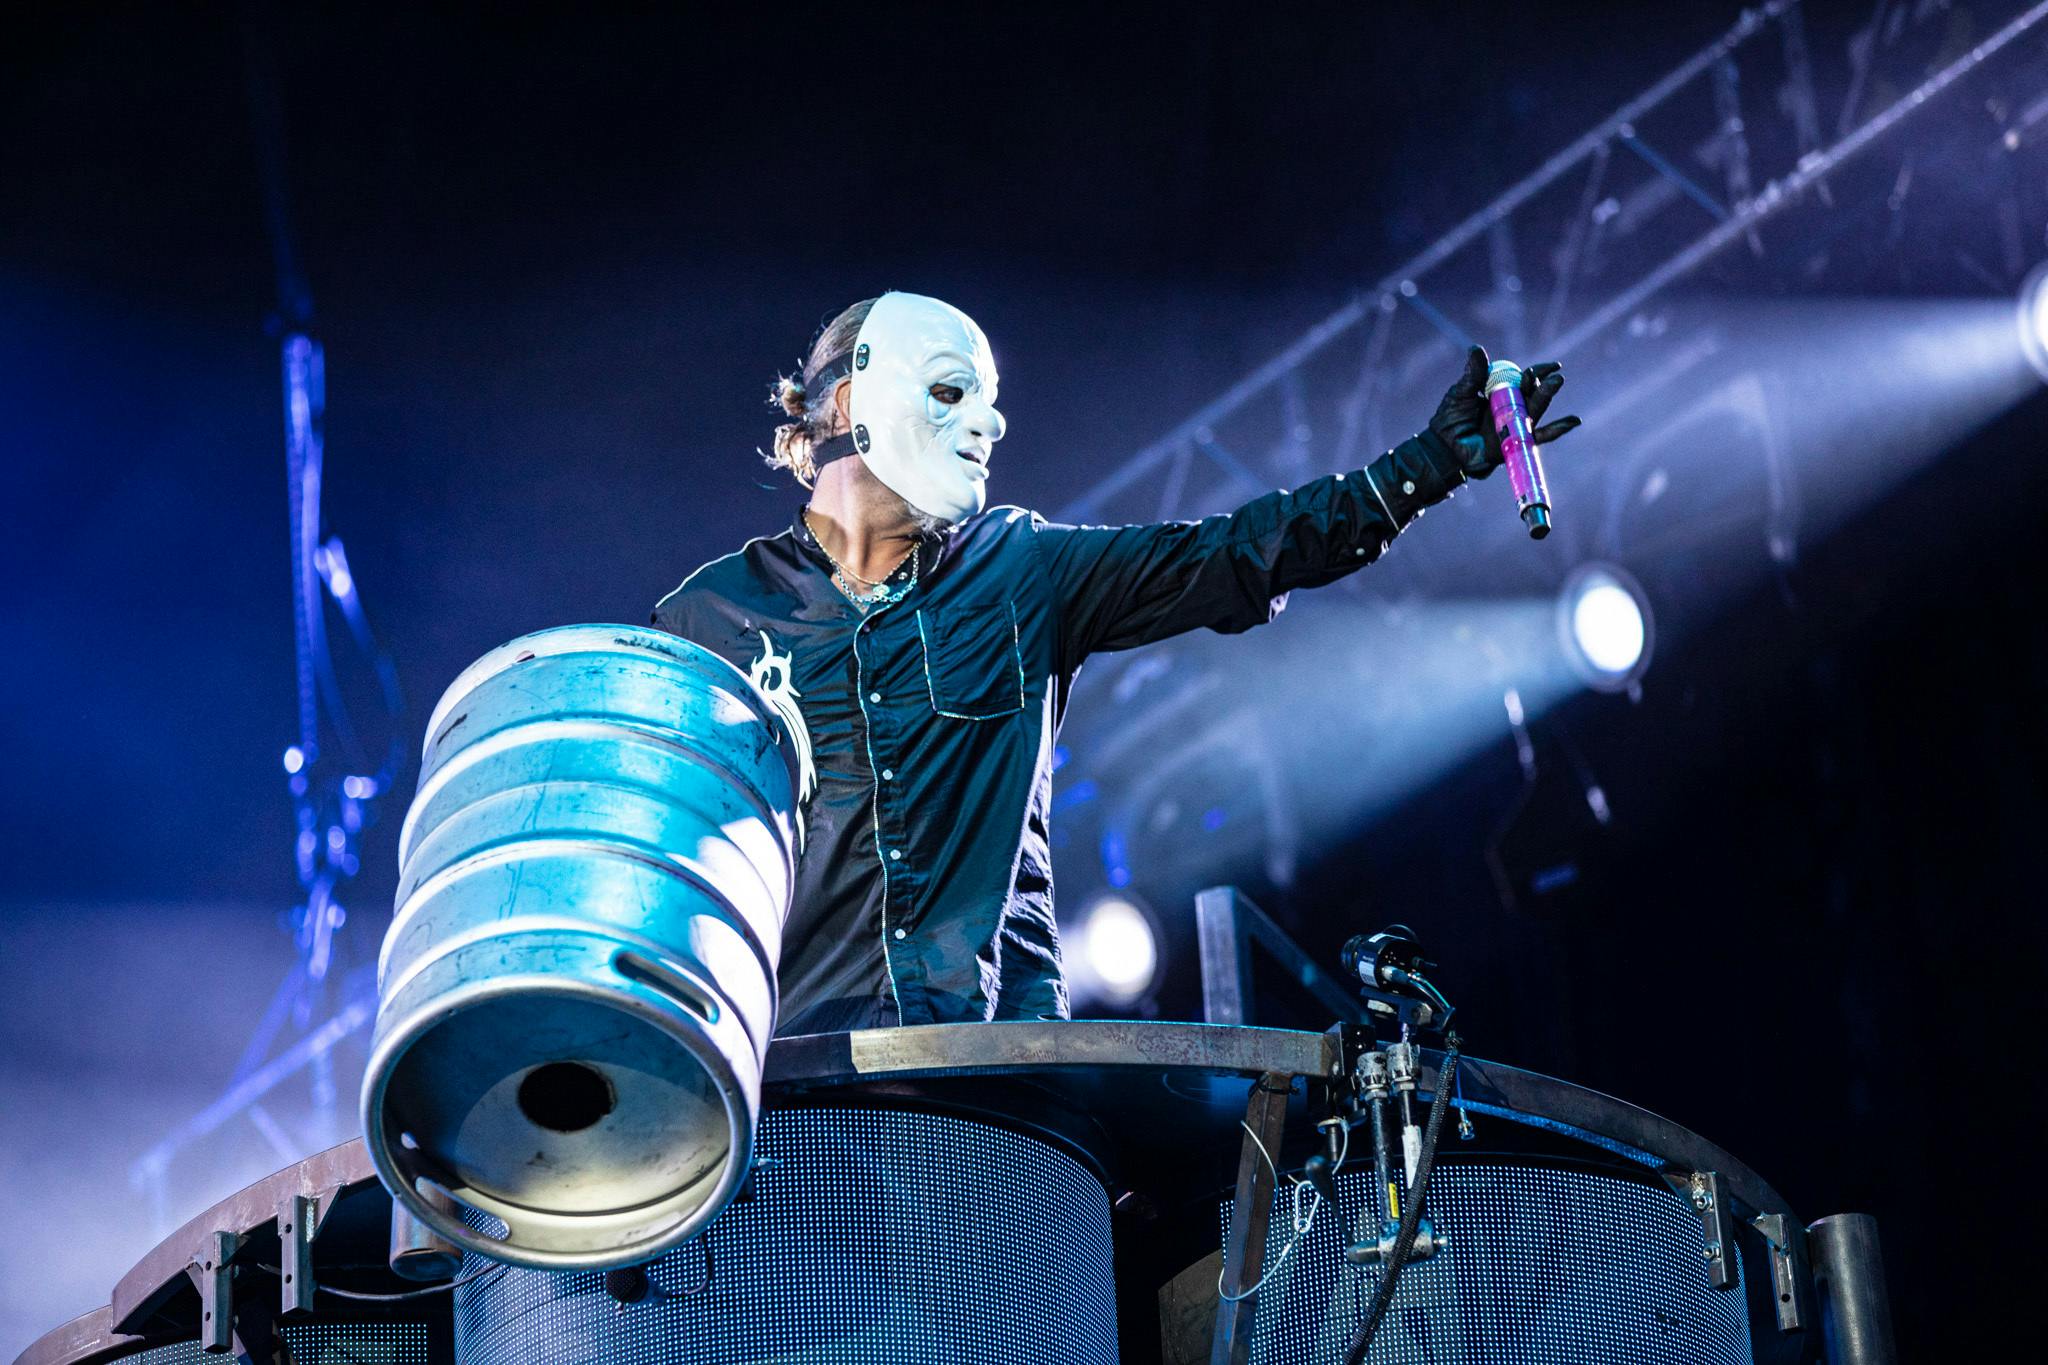 Clown to miss the rest of this month’s Slipknot shows due to wife’s health